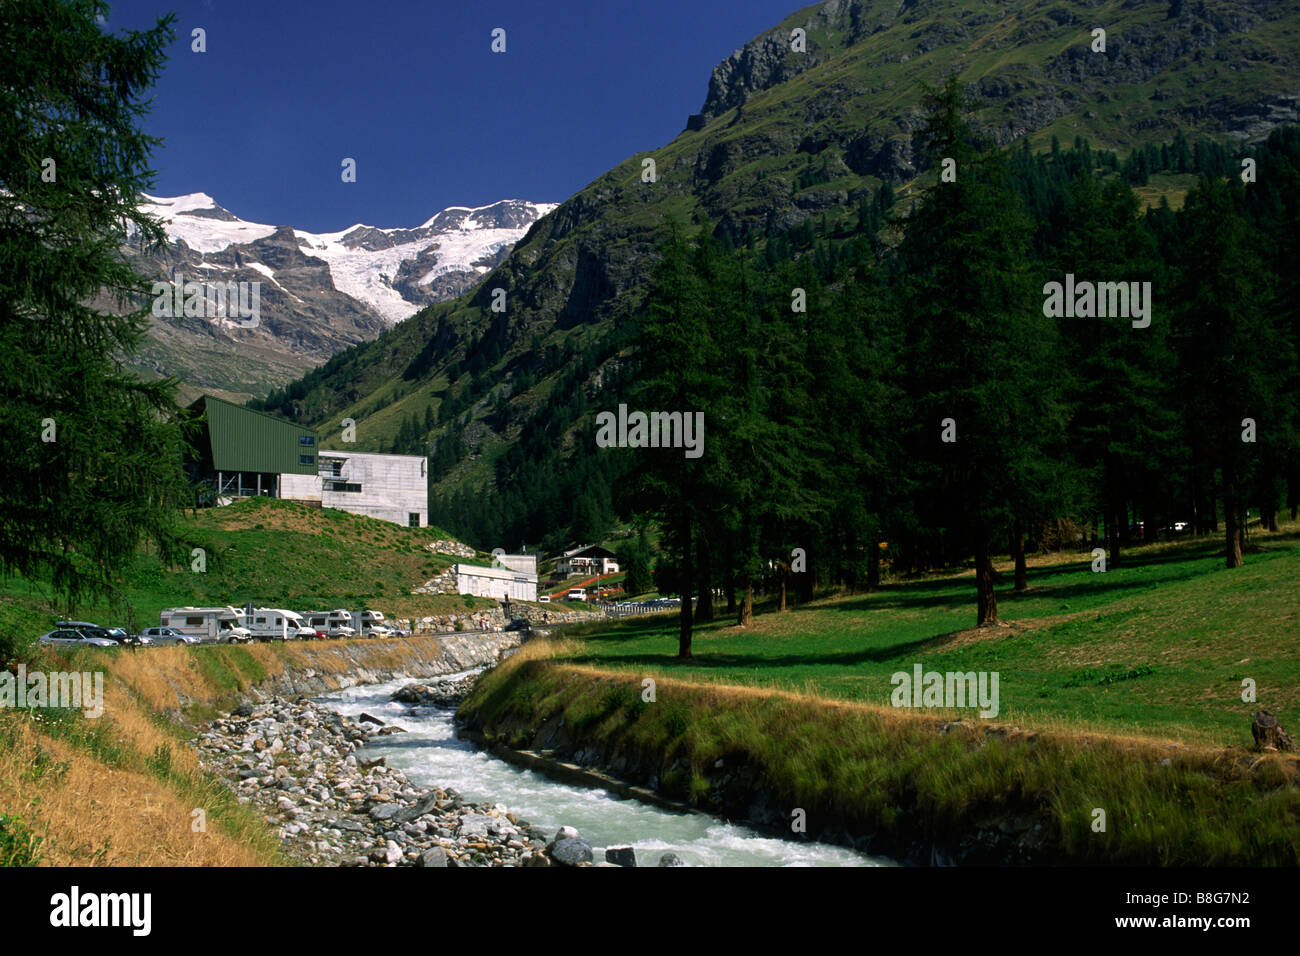 Italy, Valle d'Aosta, Lys valley, Gressoney la Trinité, Lys river and Mount Rosa Stock Photo